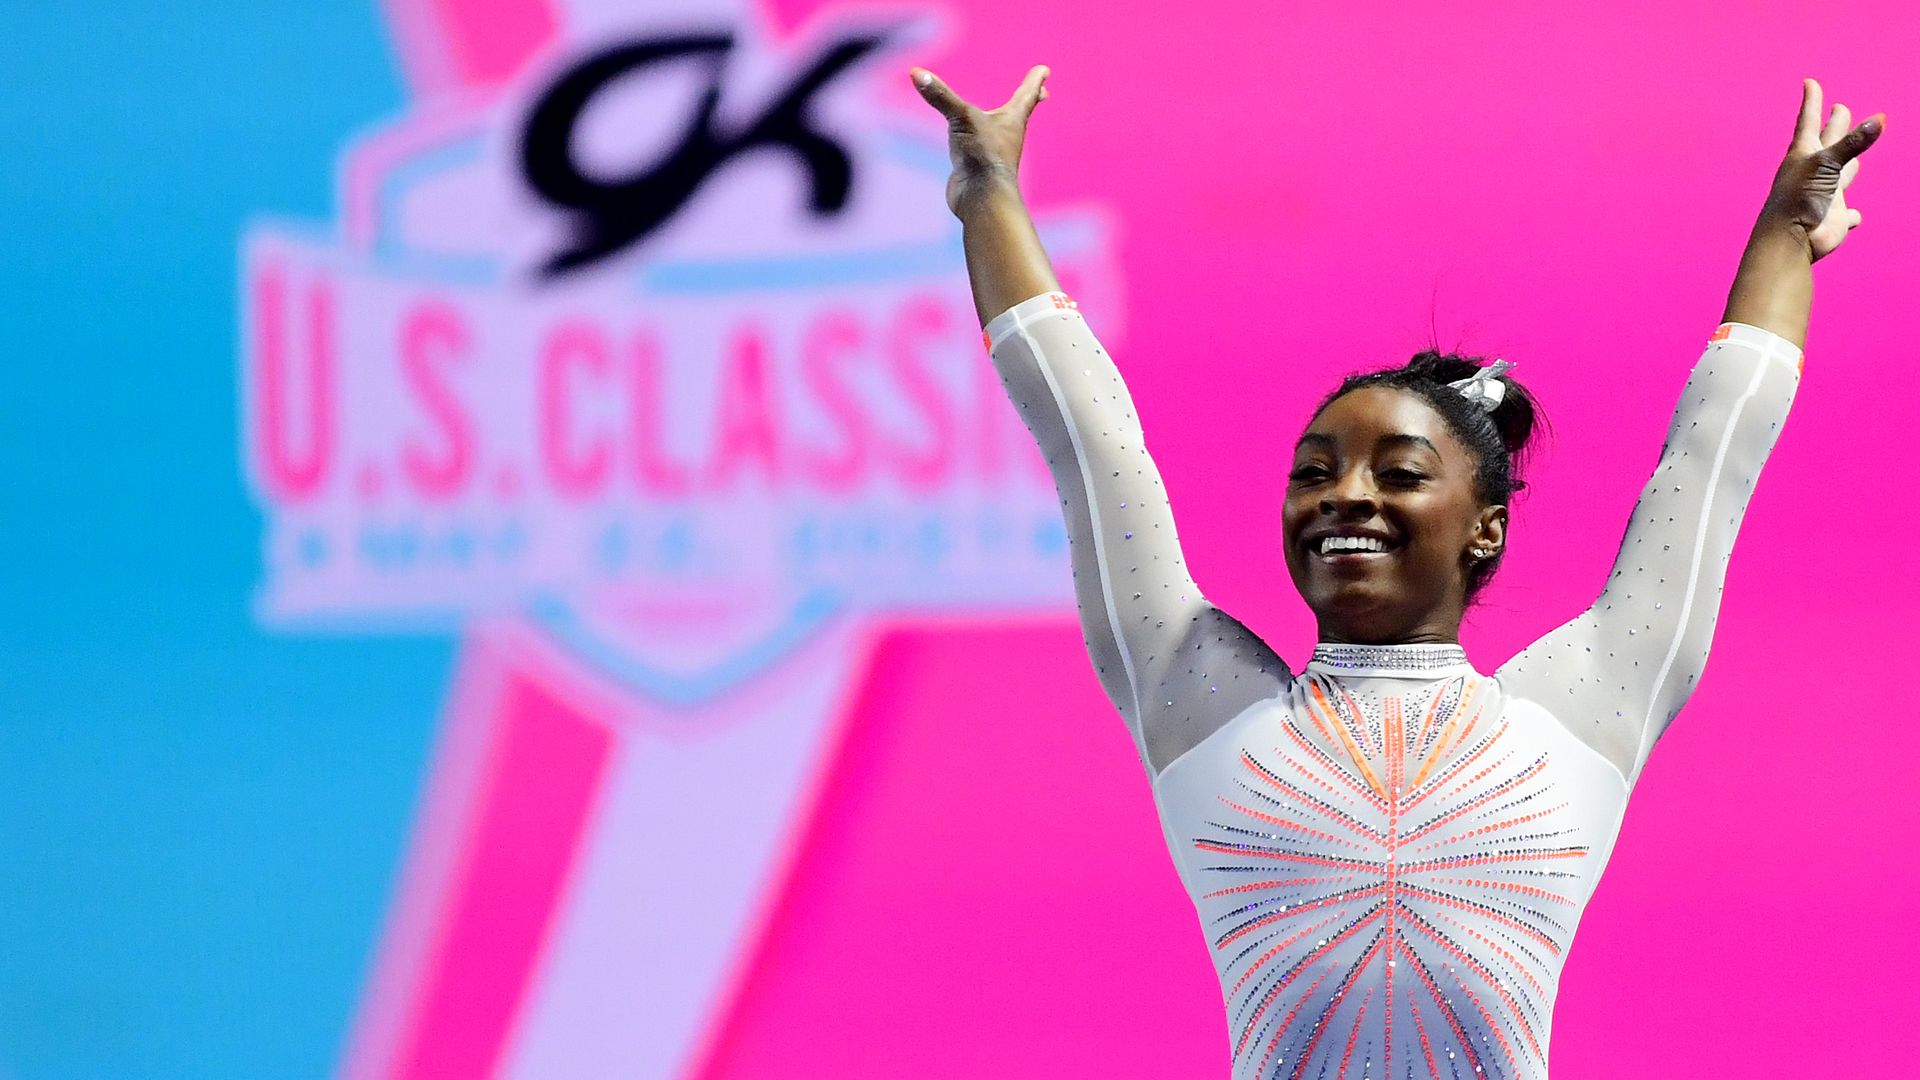 Photo of Simone Biles smiling with her arms raised high into the air at the U.S. Classic gymnastics competition